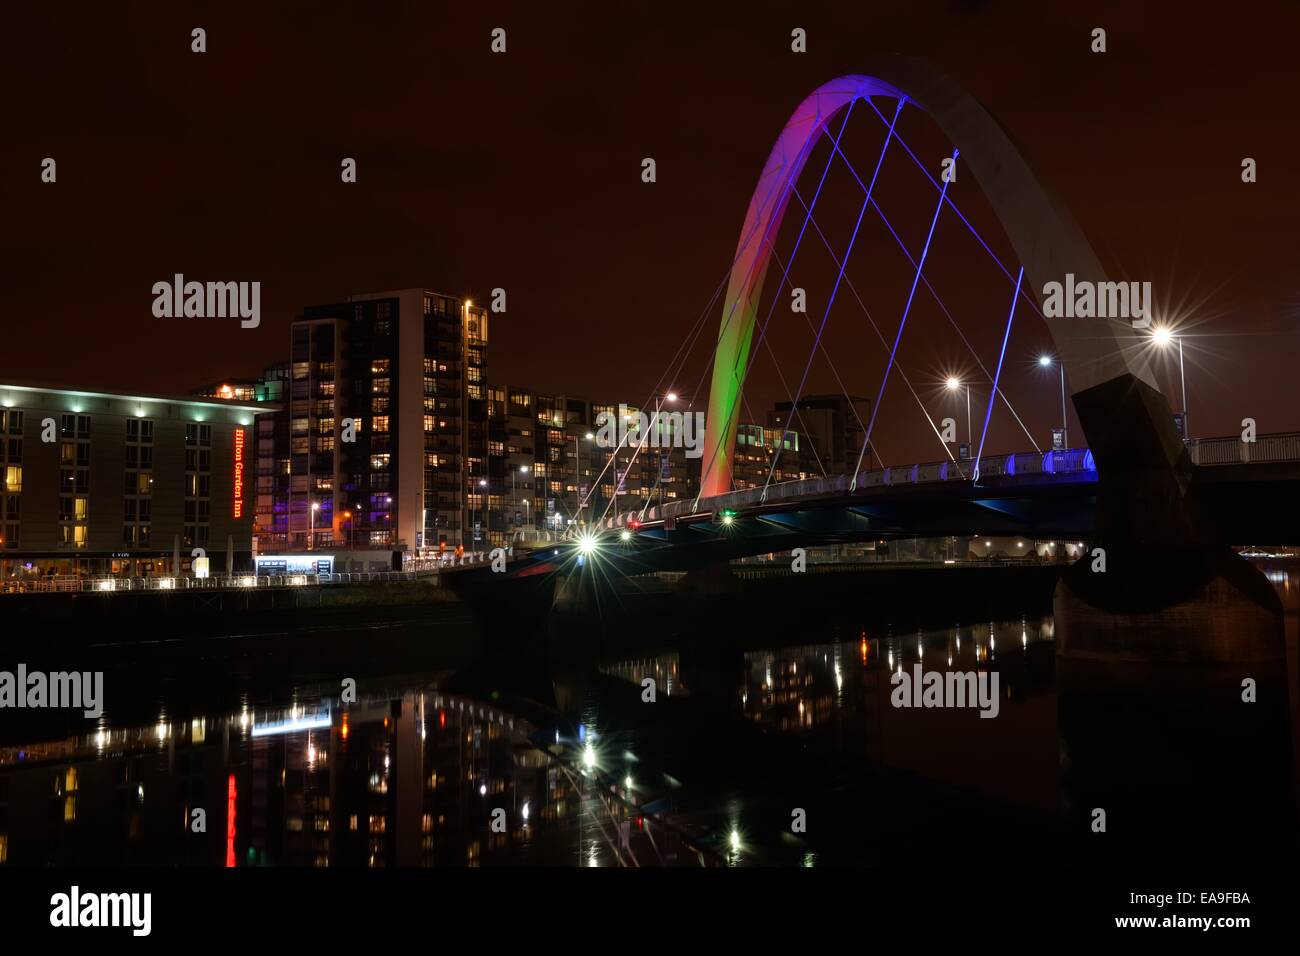 the-river-clyde-in-glasgow-with-the-arc-